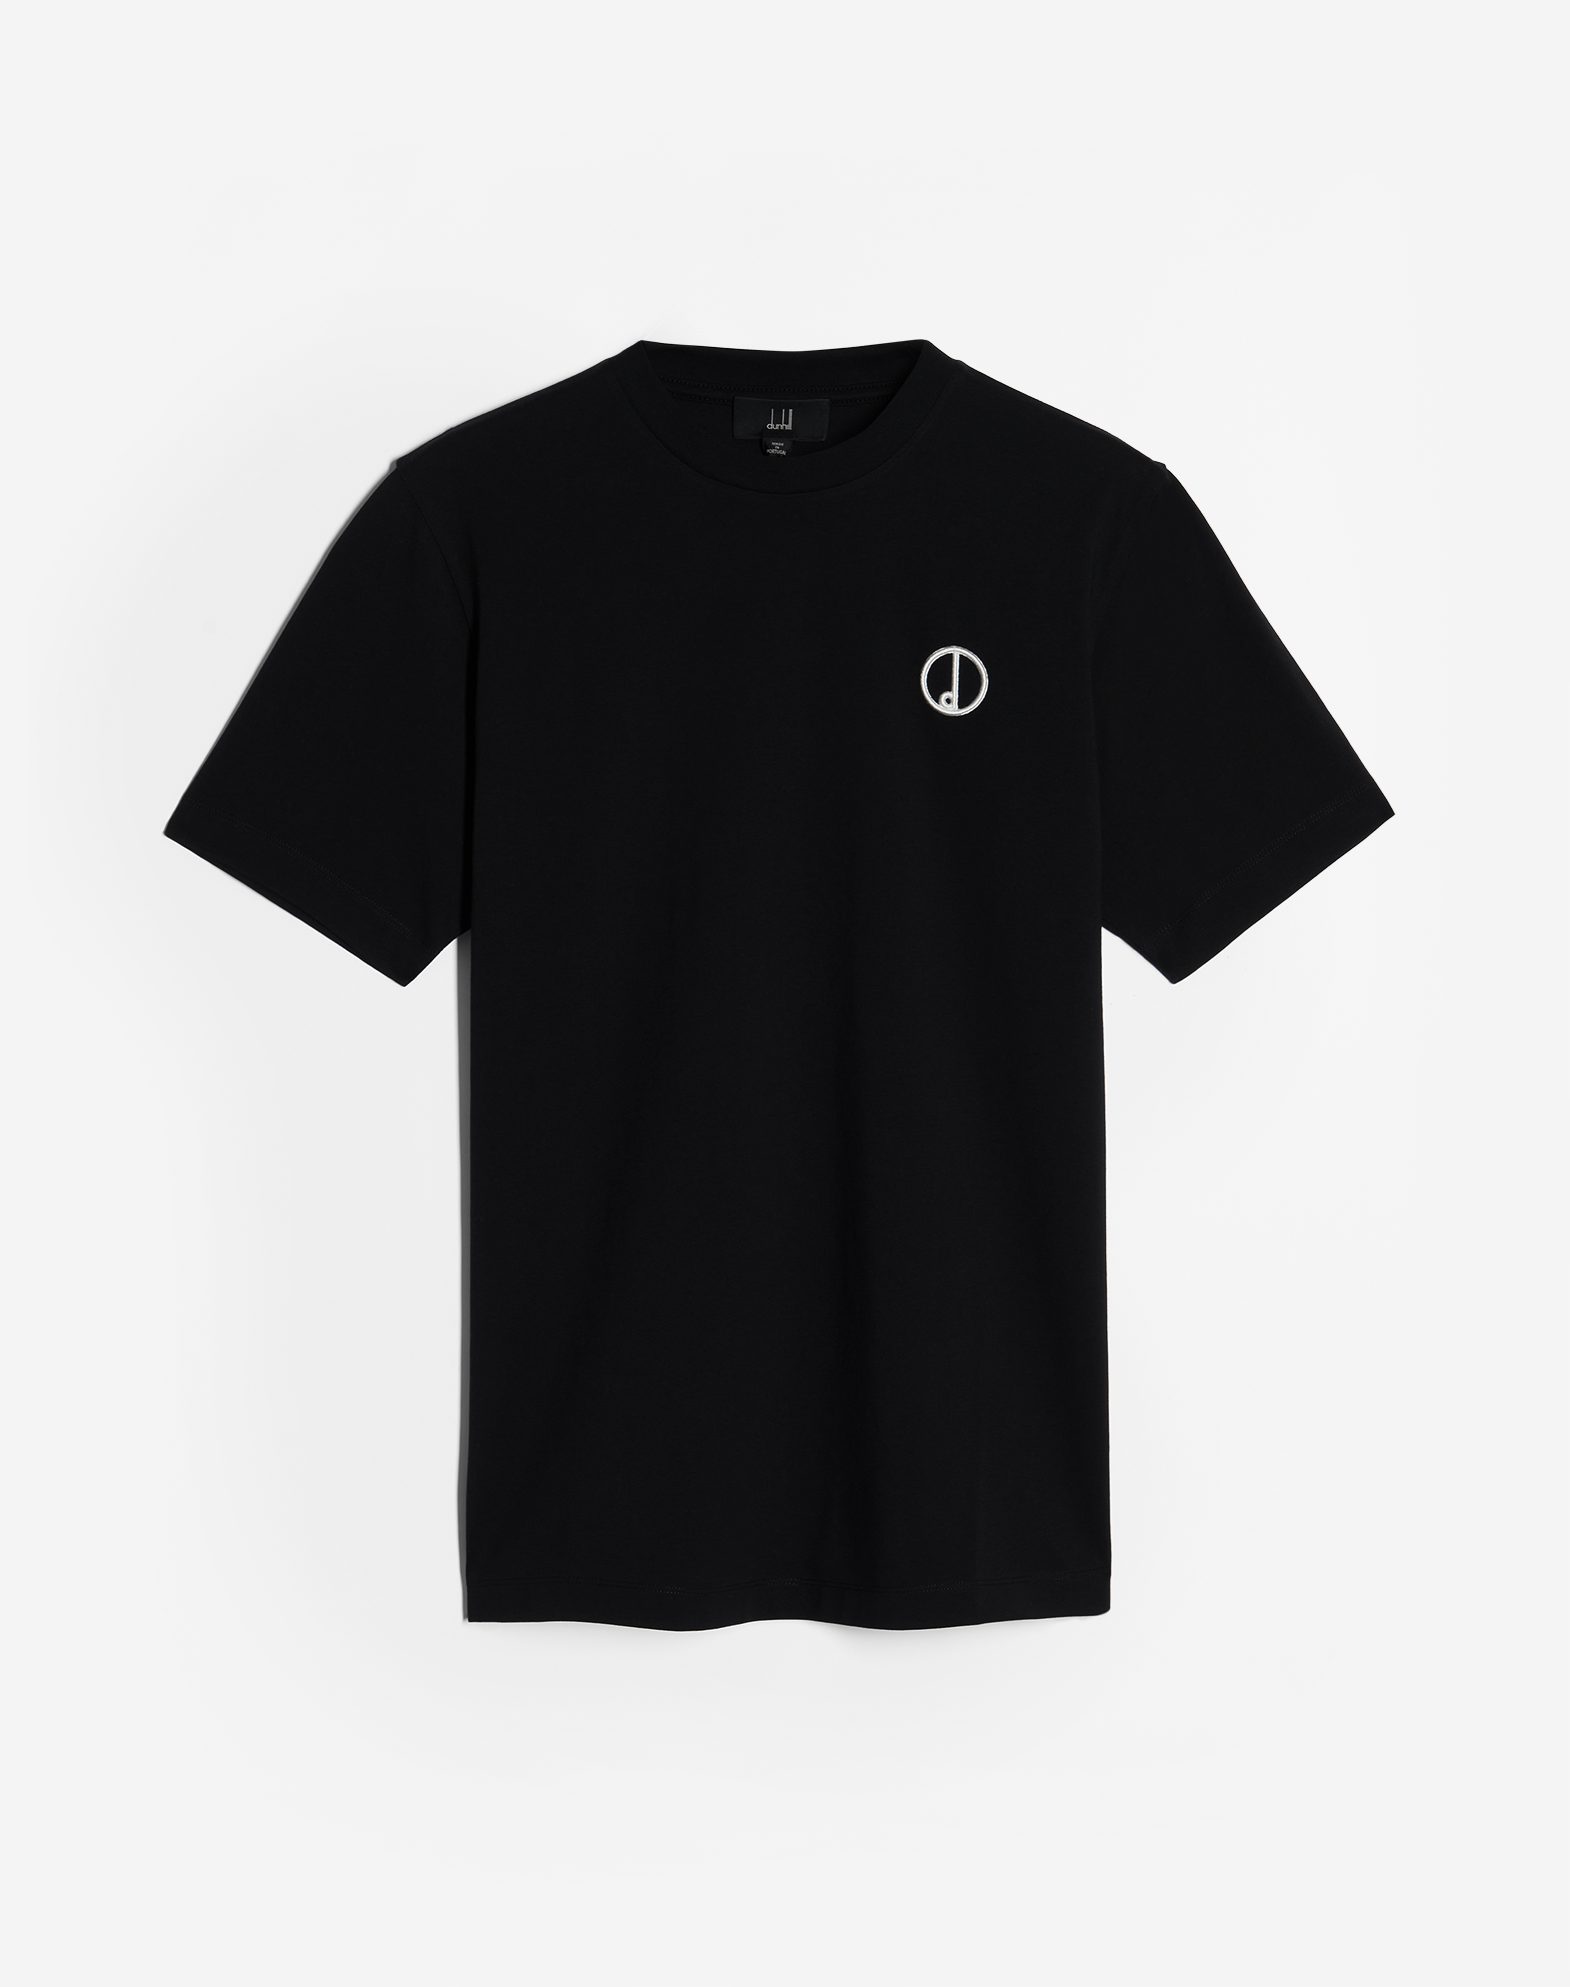 Dunhill D T-shirt In Black